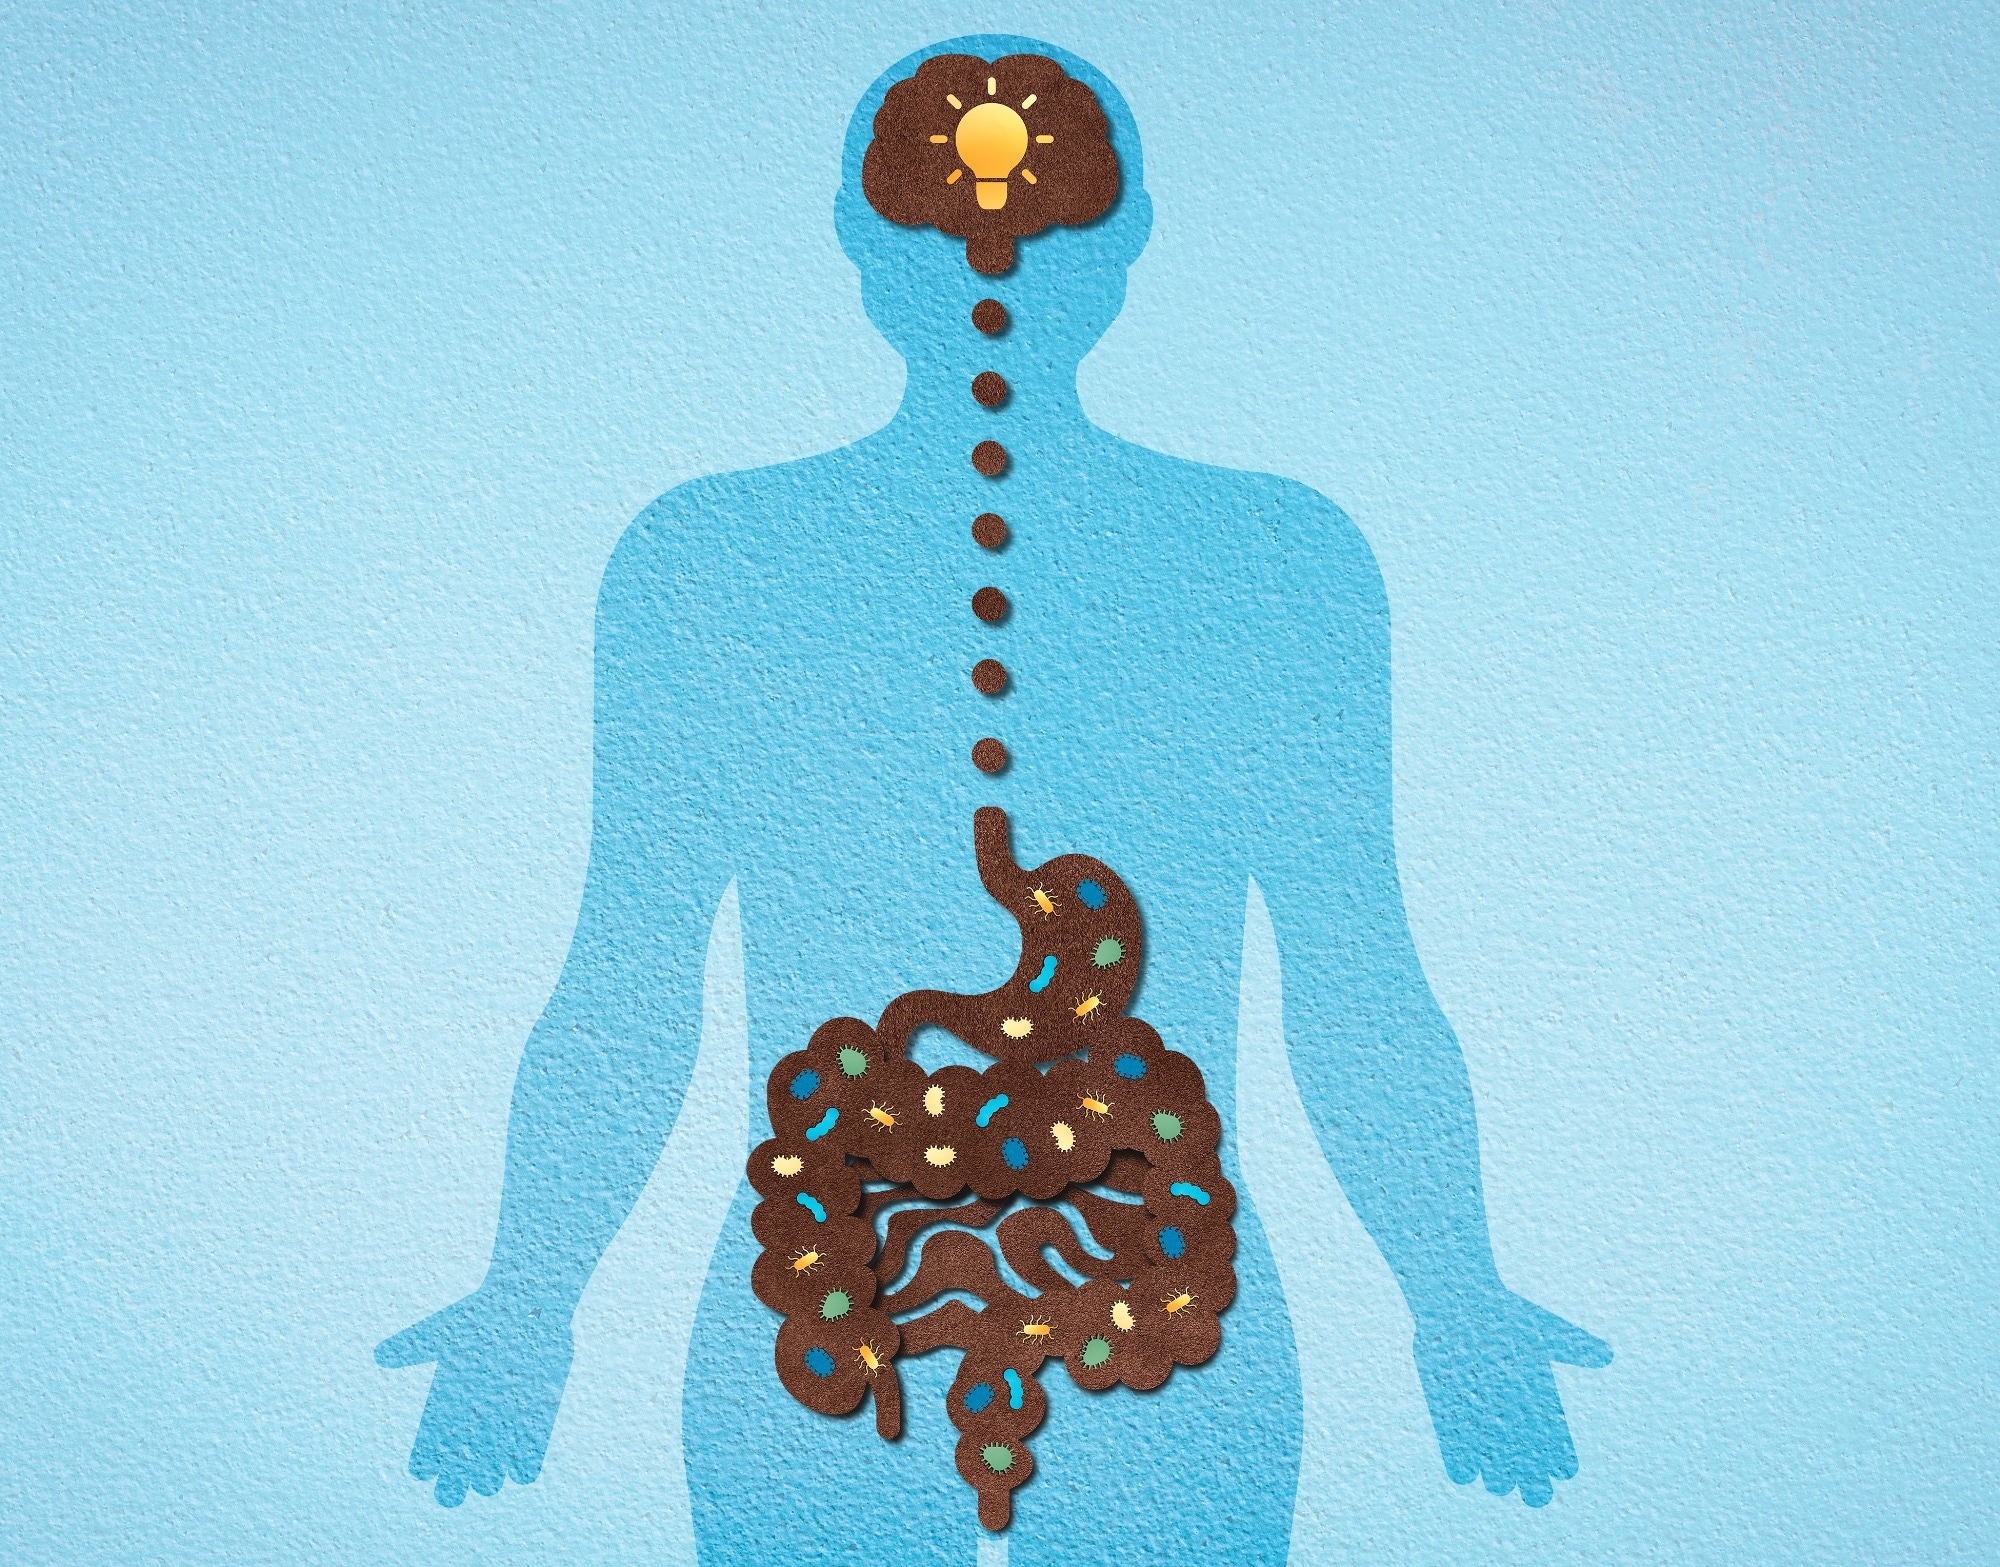 Study: Gut microbiome composition may be an indicator of preclinical Alzheimer’s disease. Image Credit: ArtemisDiana / Shutterstock